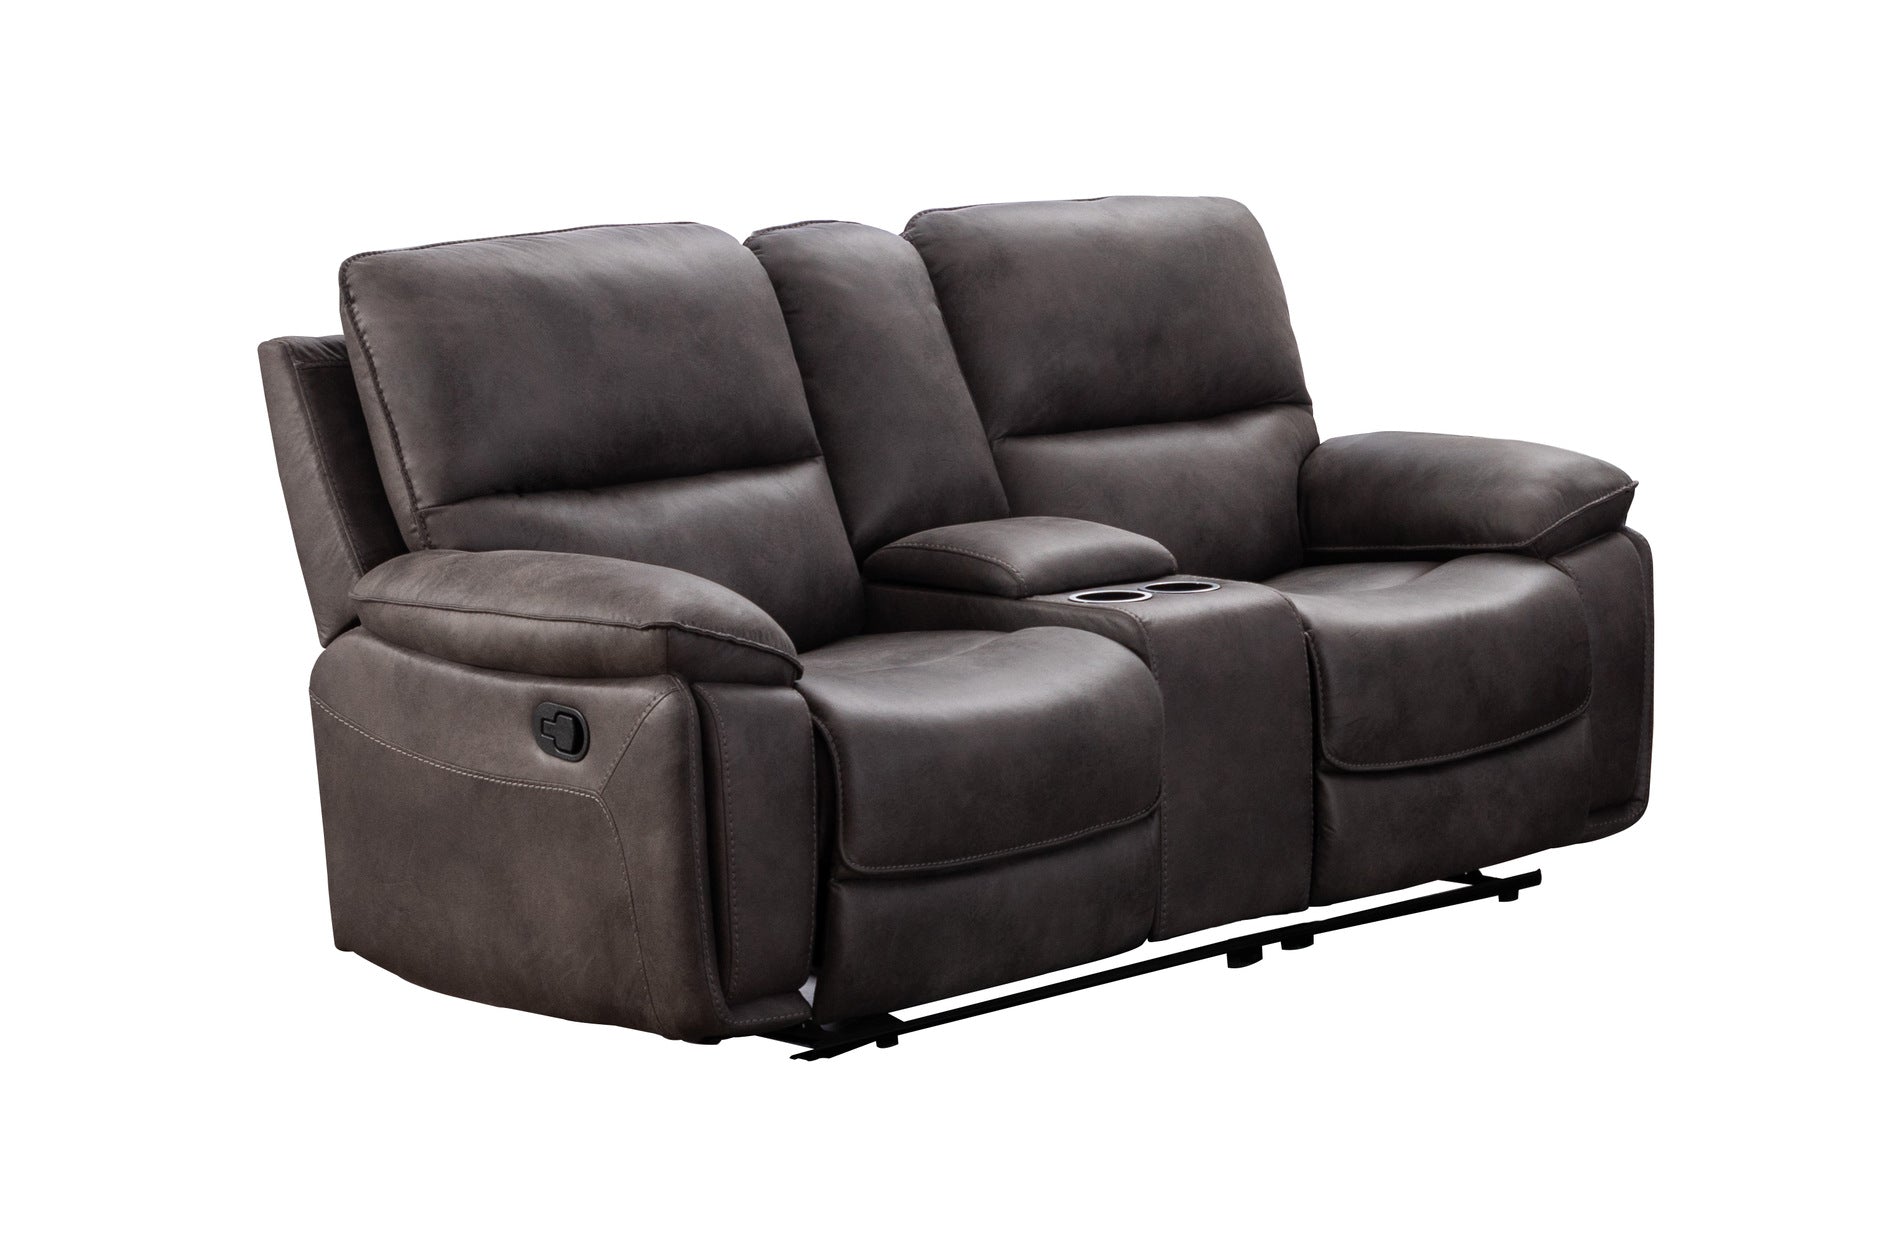 Grey Easton Recliner Seating Collection 99929GRY